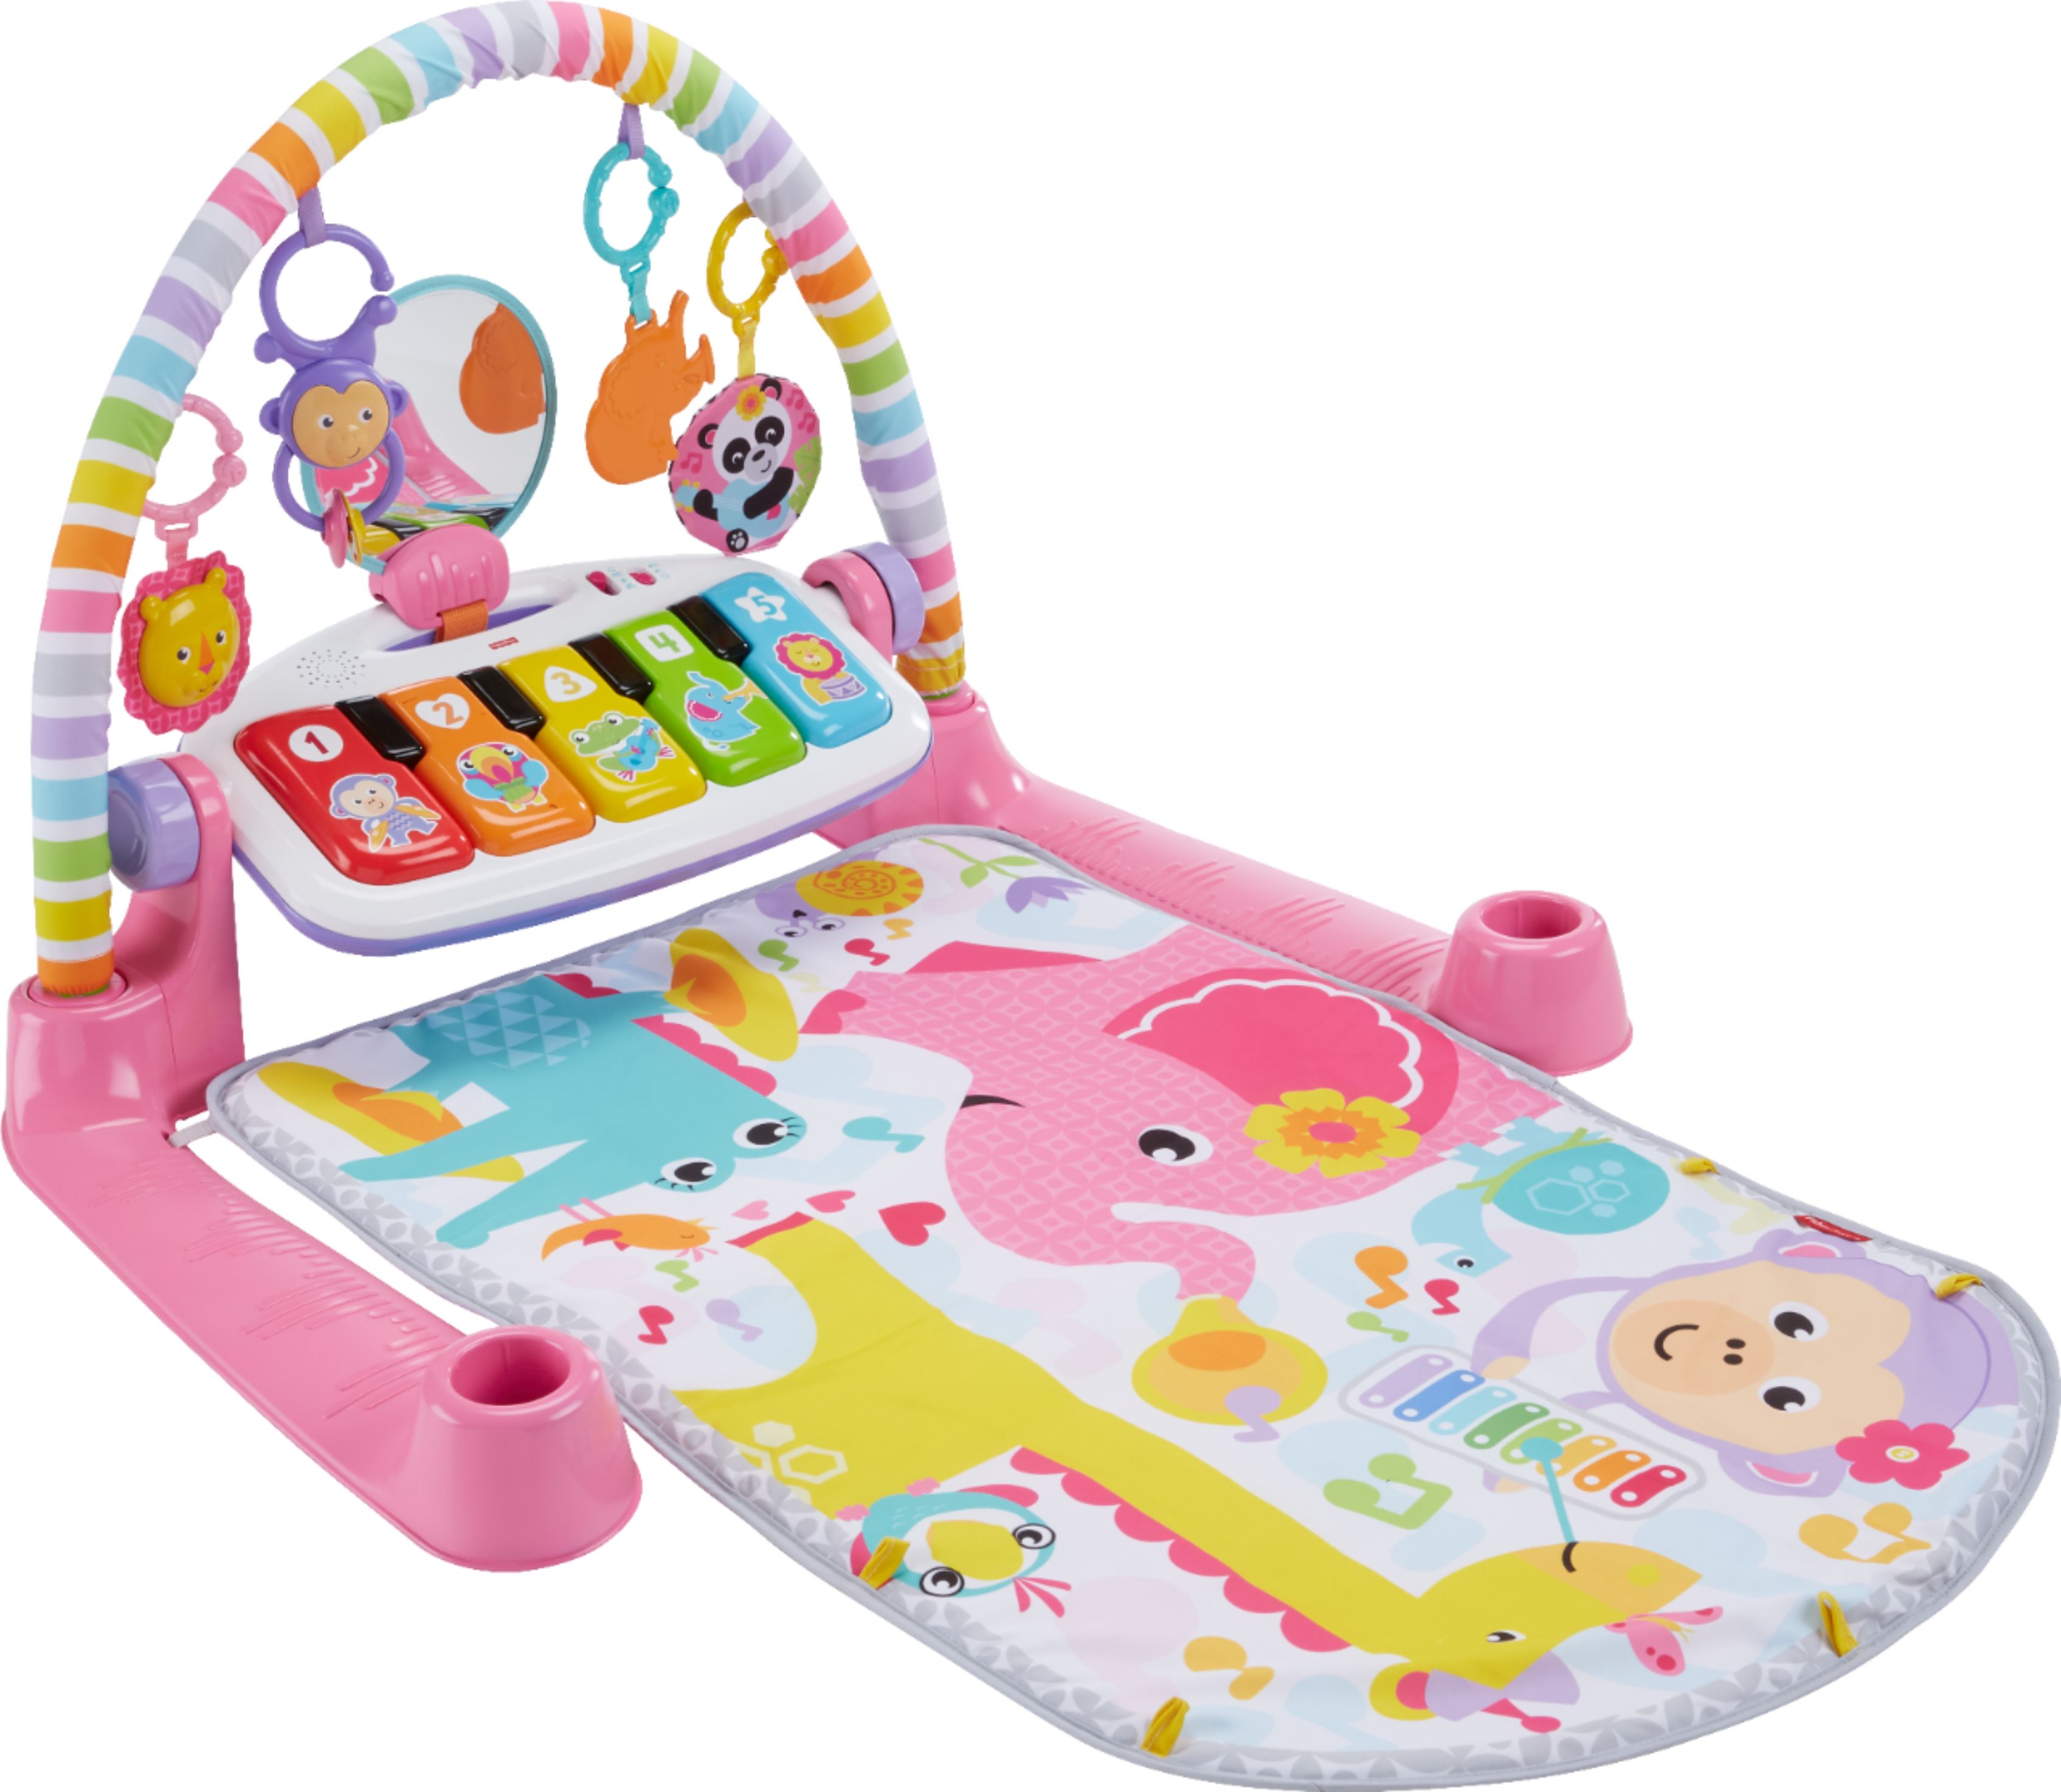 Angle View: Fisher-Price Deluxe Kick 'n Play Piano Gym, Pink